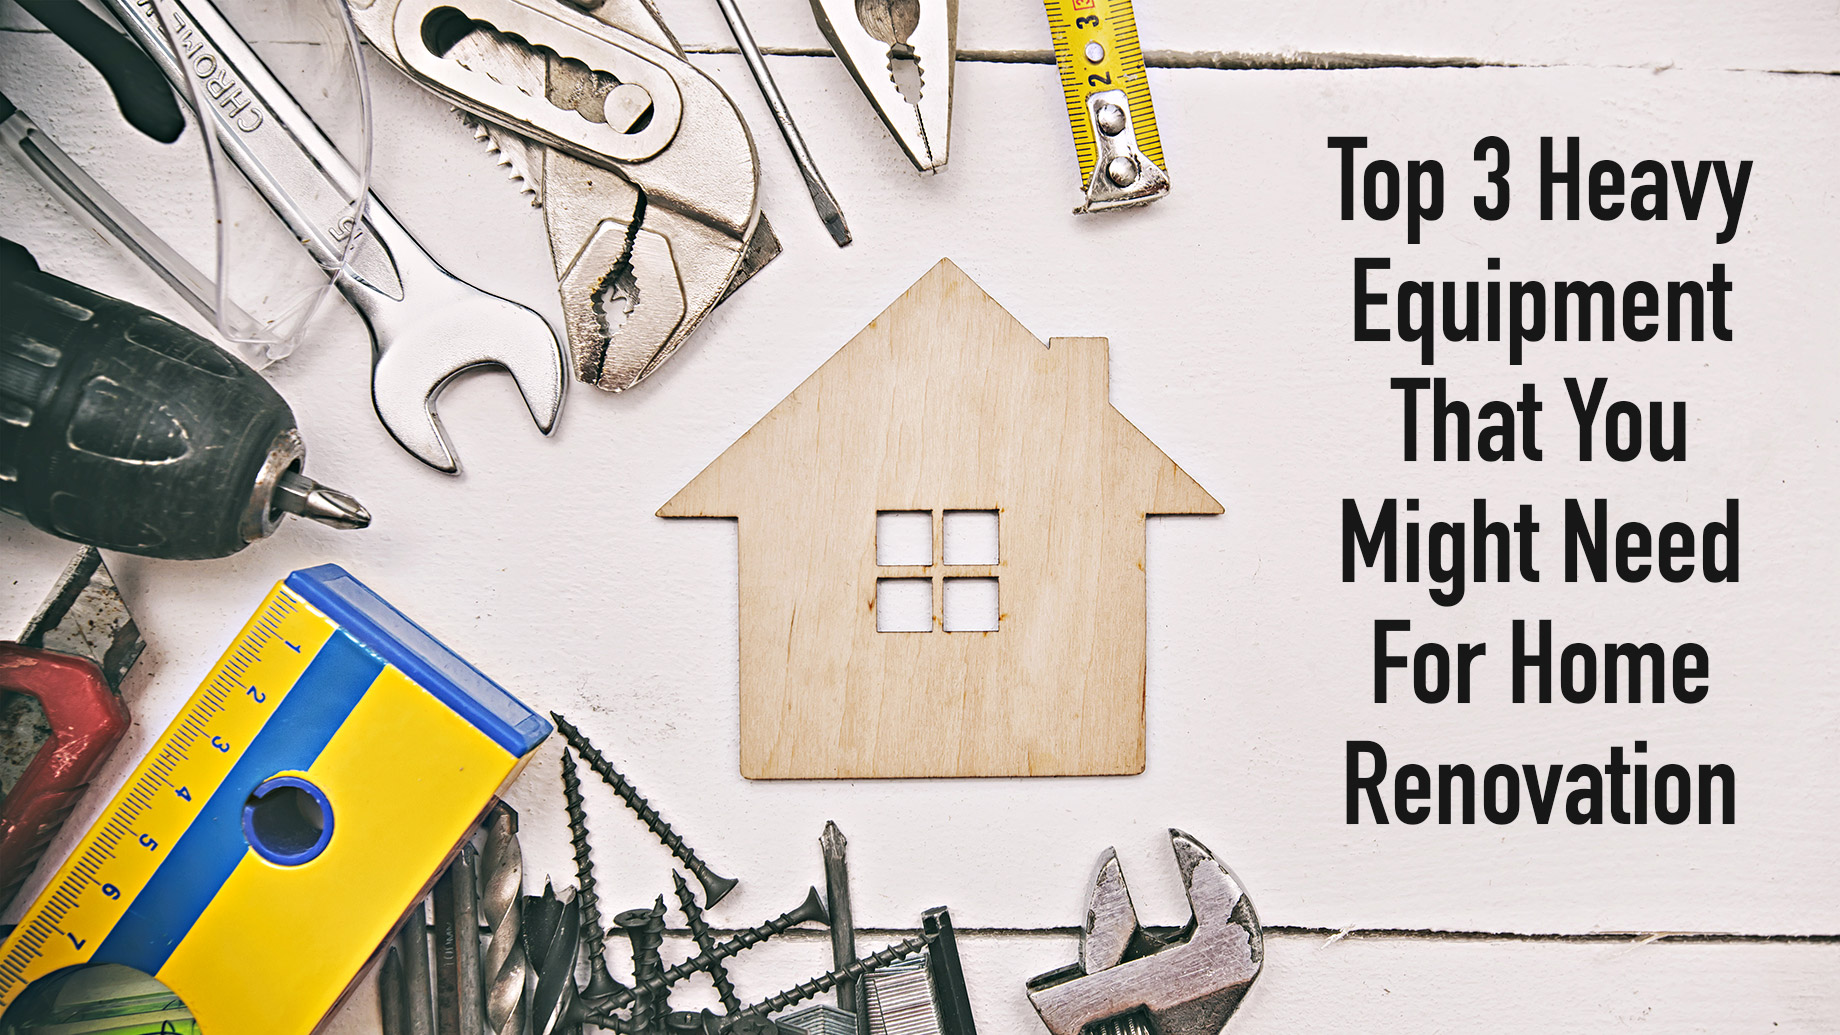 Top 3 Heavy Equipment That You Might Need For Home Renovation